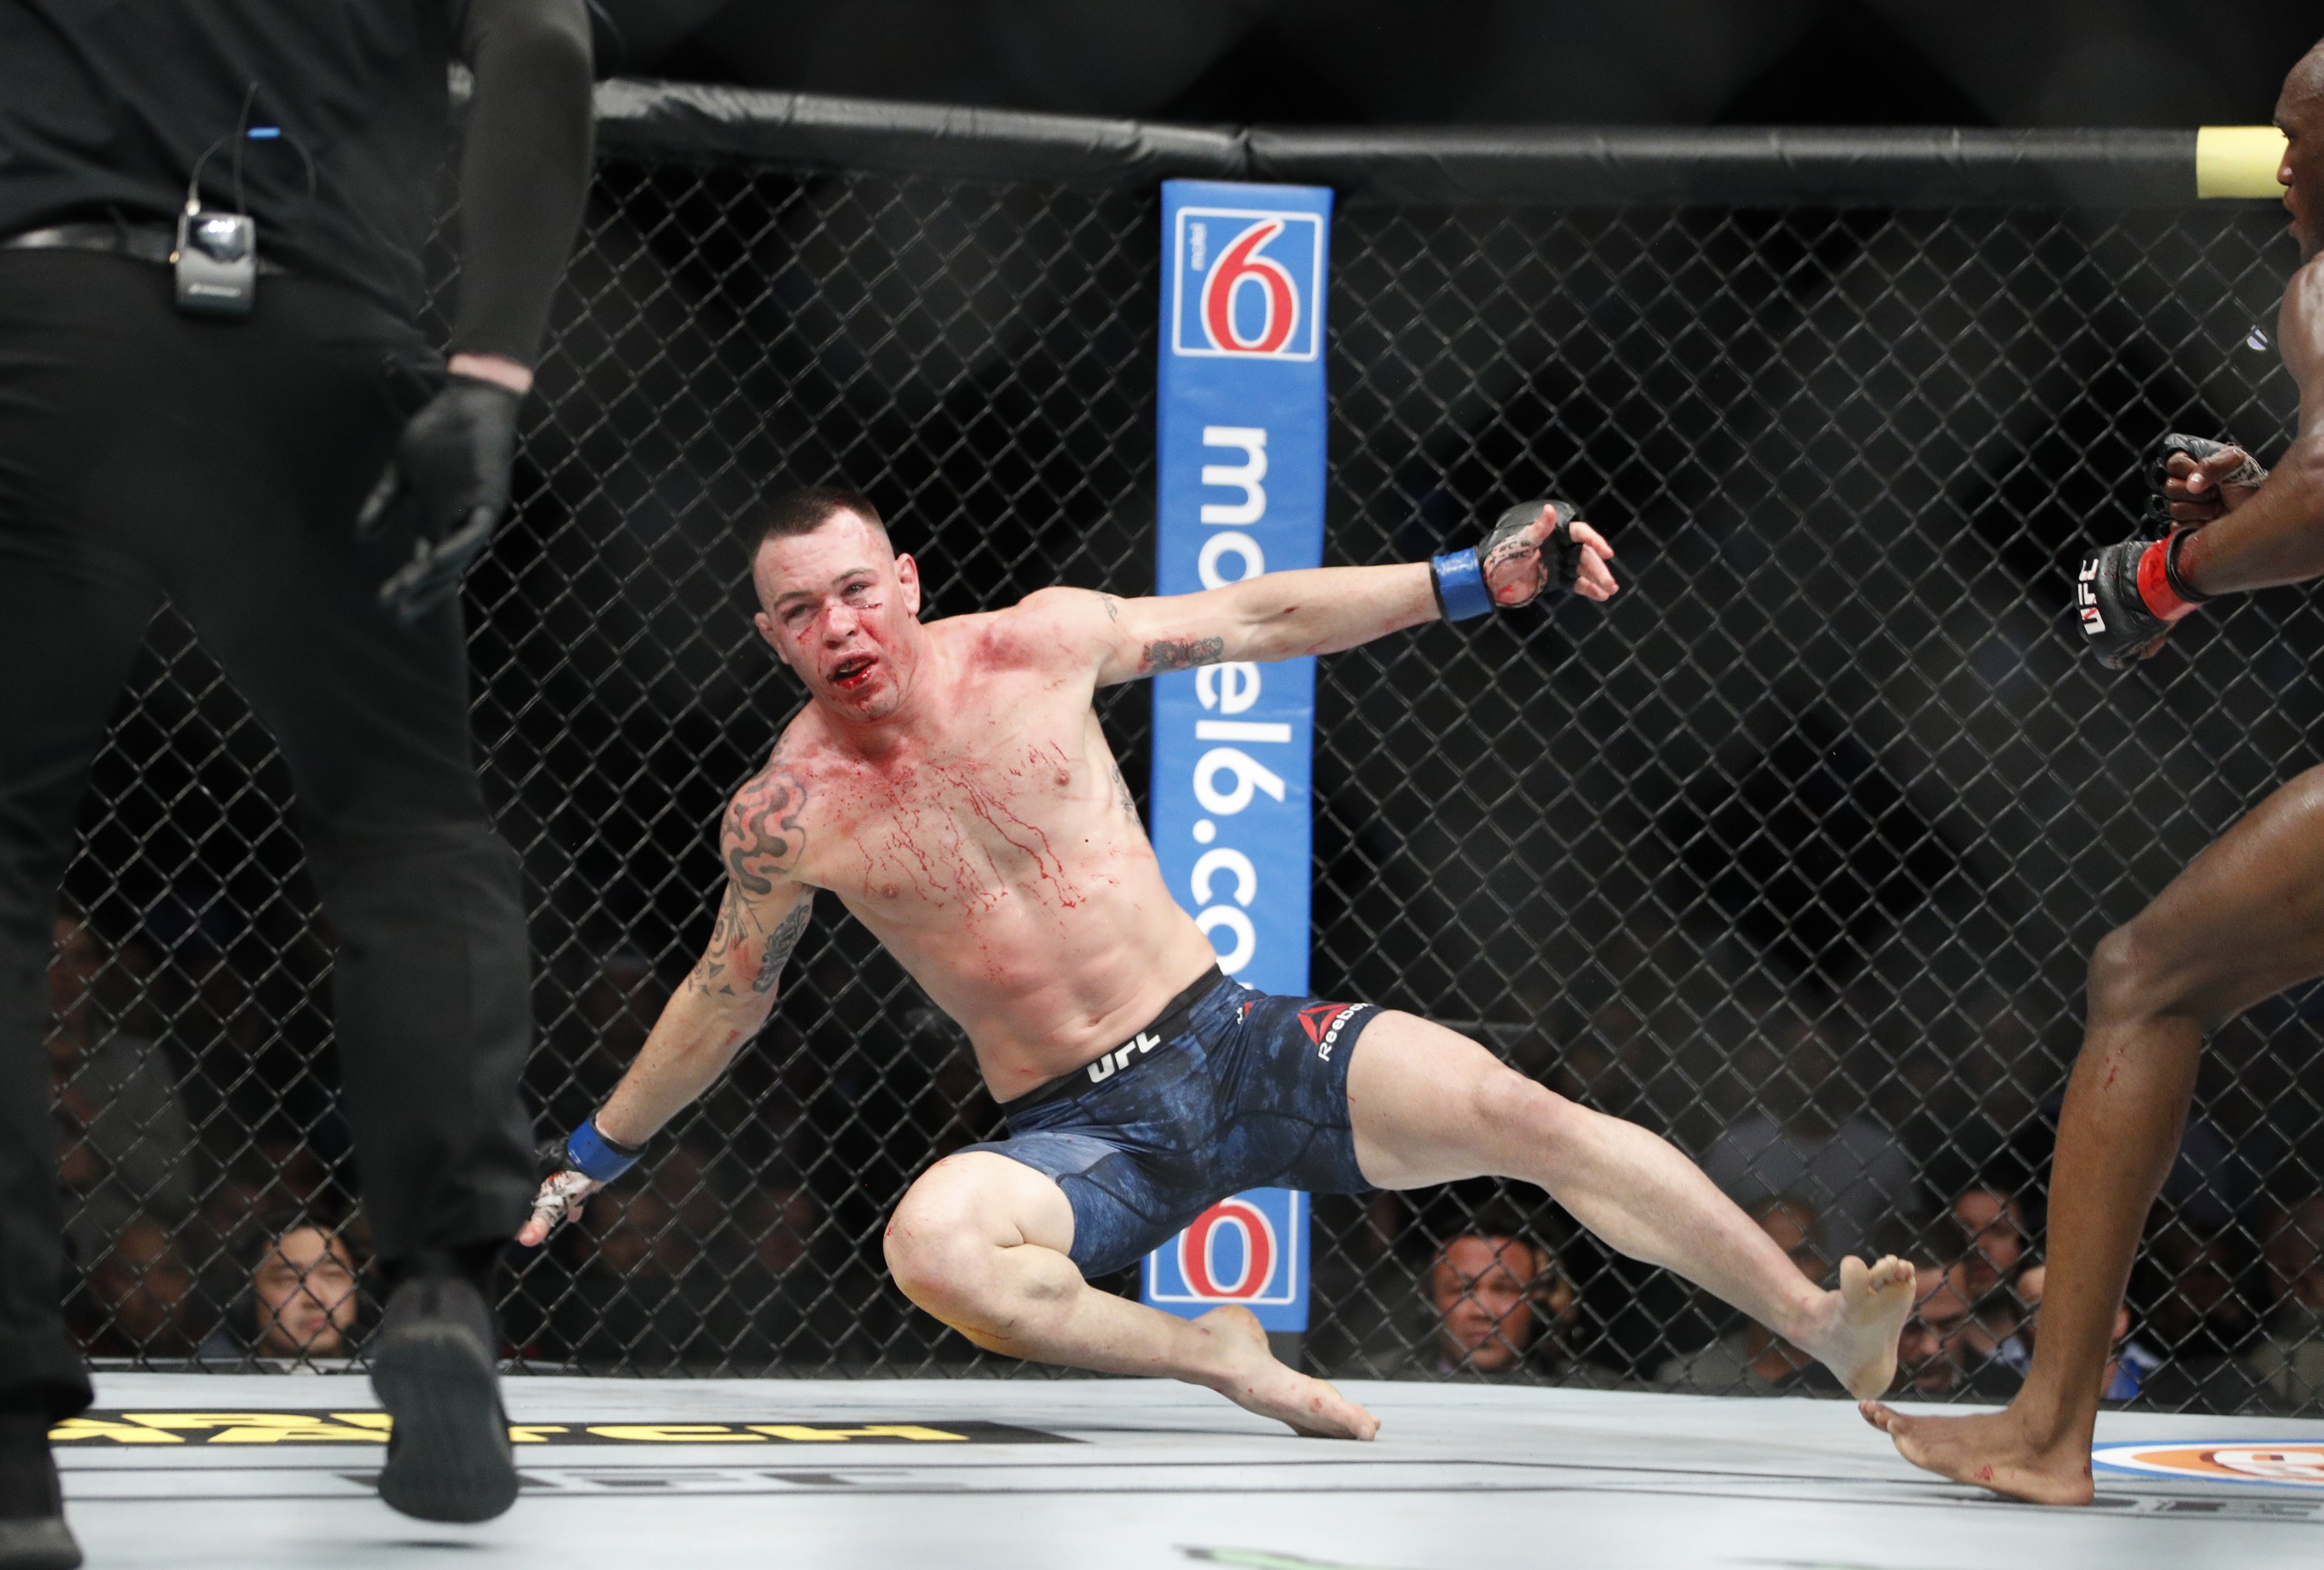 Colby Covington is knocked to the mat by Kamaru Usman at UFC 245. Photo: AP